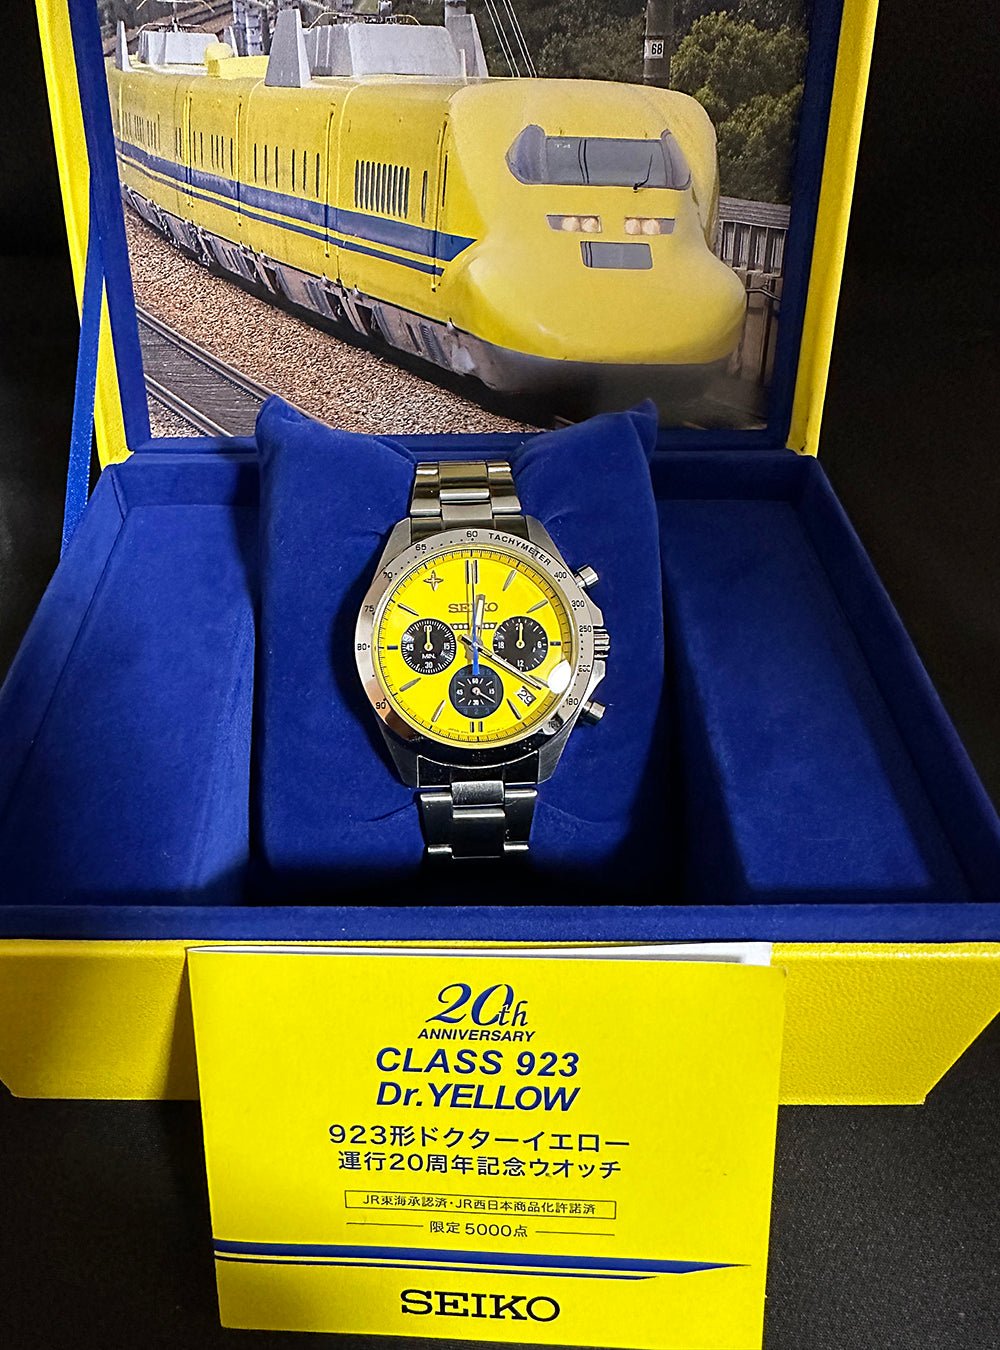 SEIKO × JR WEST 20TH ANNIVERSARY CLASS 923 DR.YELLOW MADE IN JAPAN LIMITED  EDITION